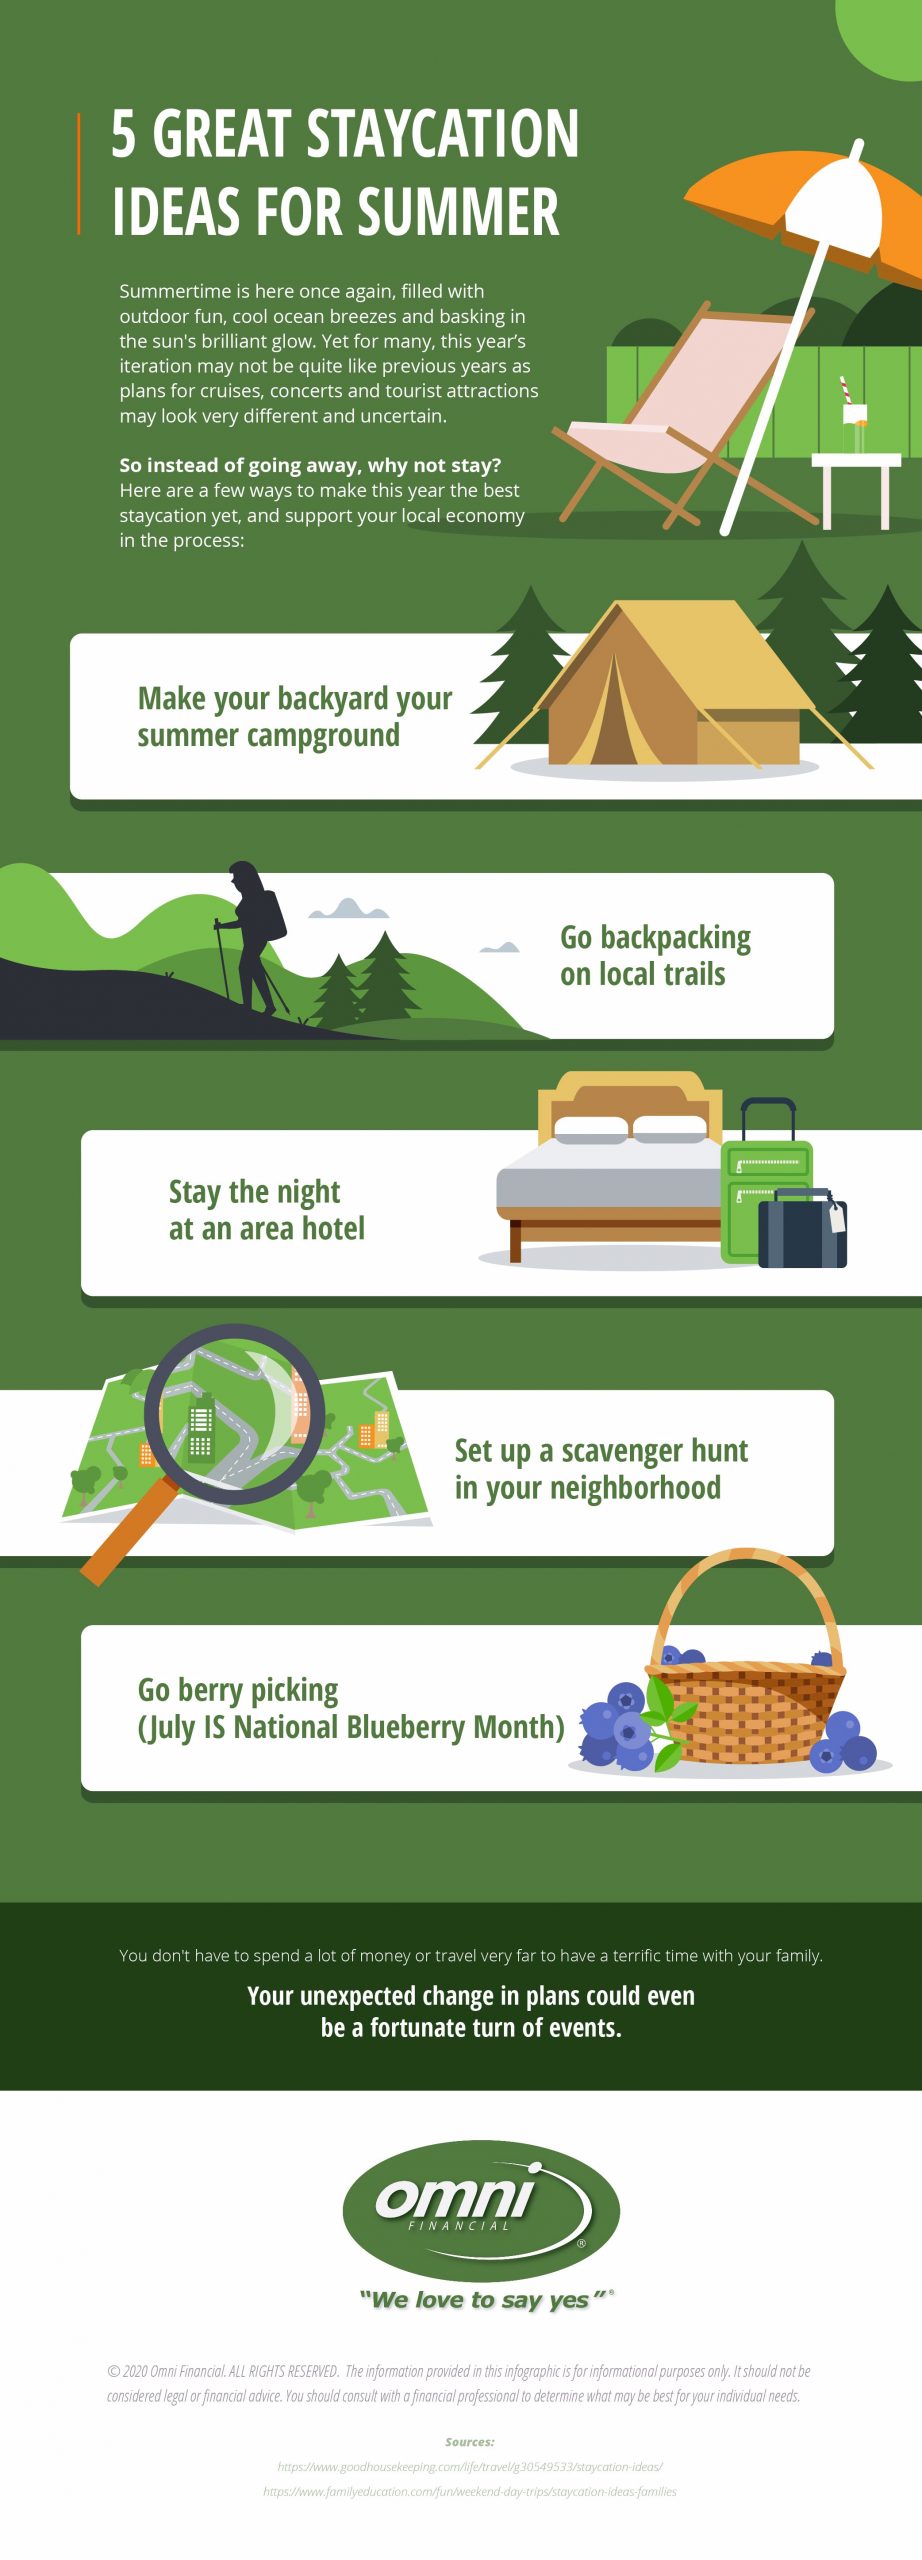 Omni Financial infographic outlining staycation ideas for summer vacation that support the local economy 